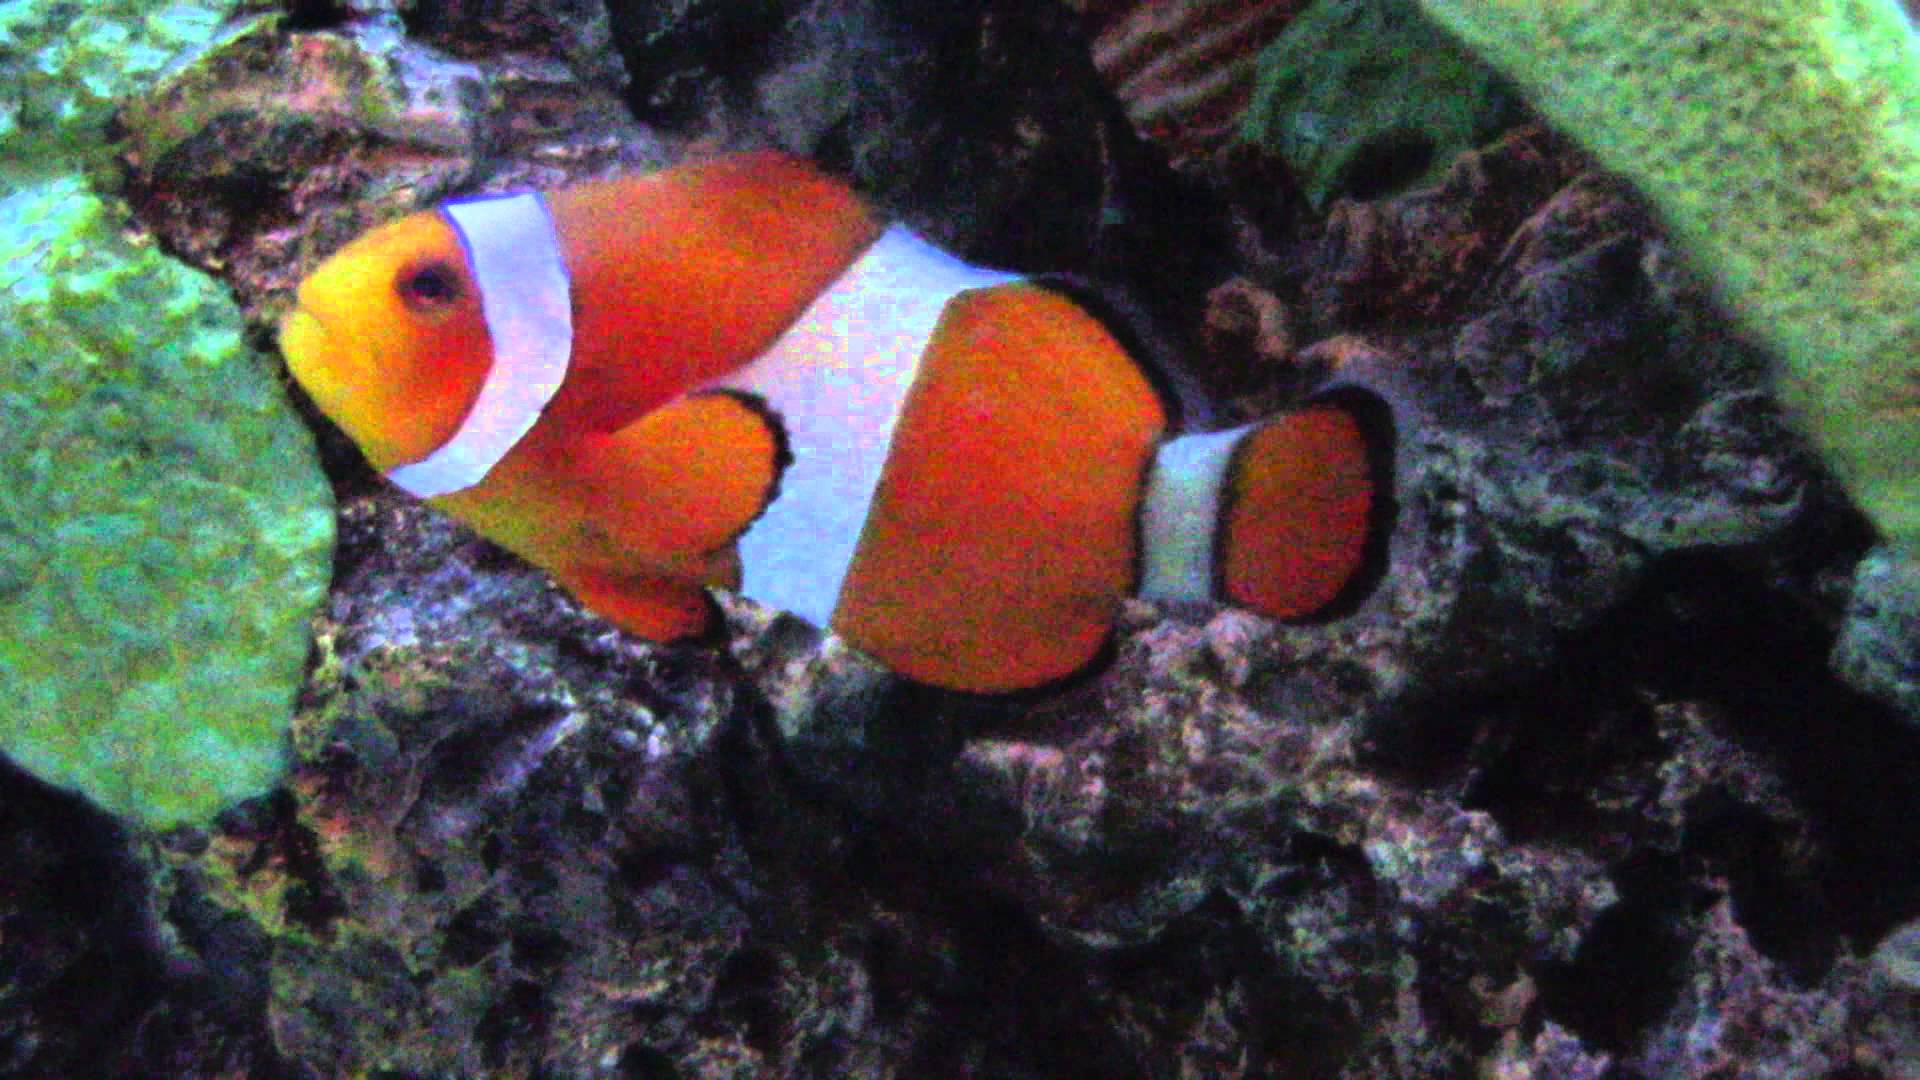 Finding Nemo Clown Fish and other Hawaiian Tropical Fish - YouTube